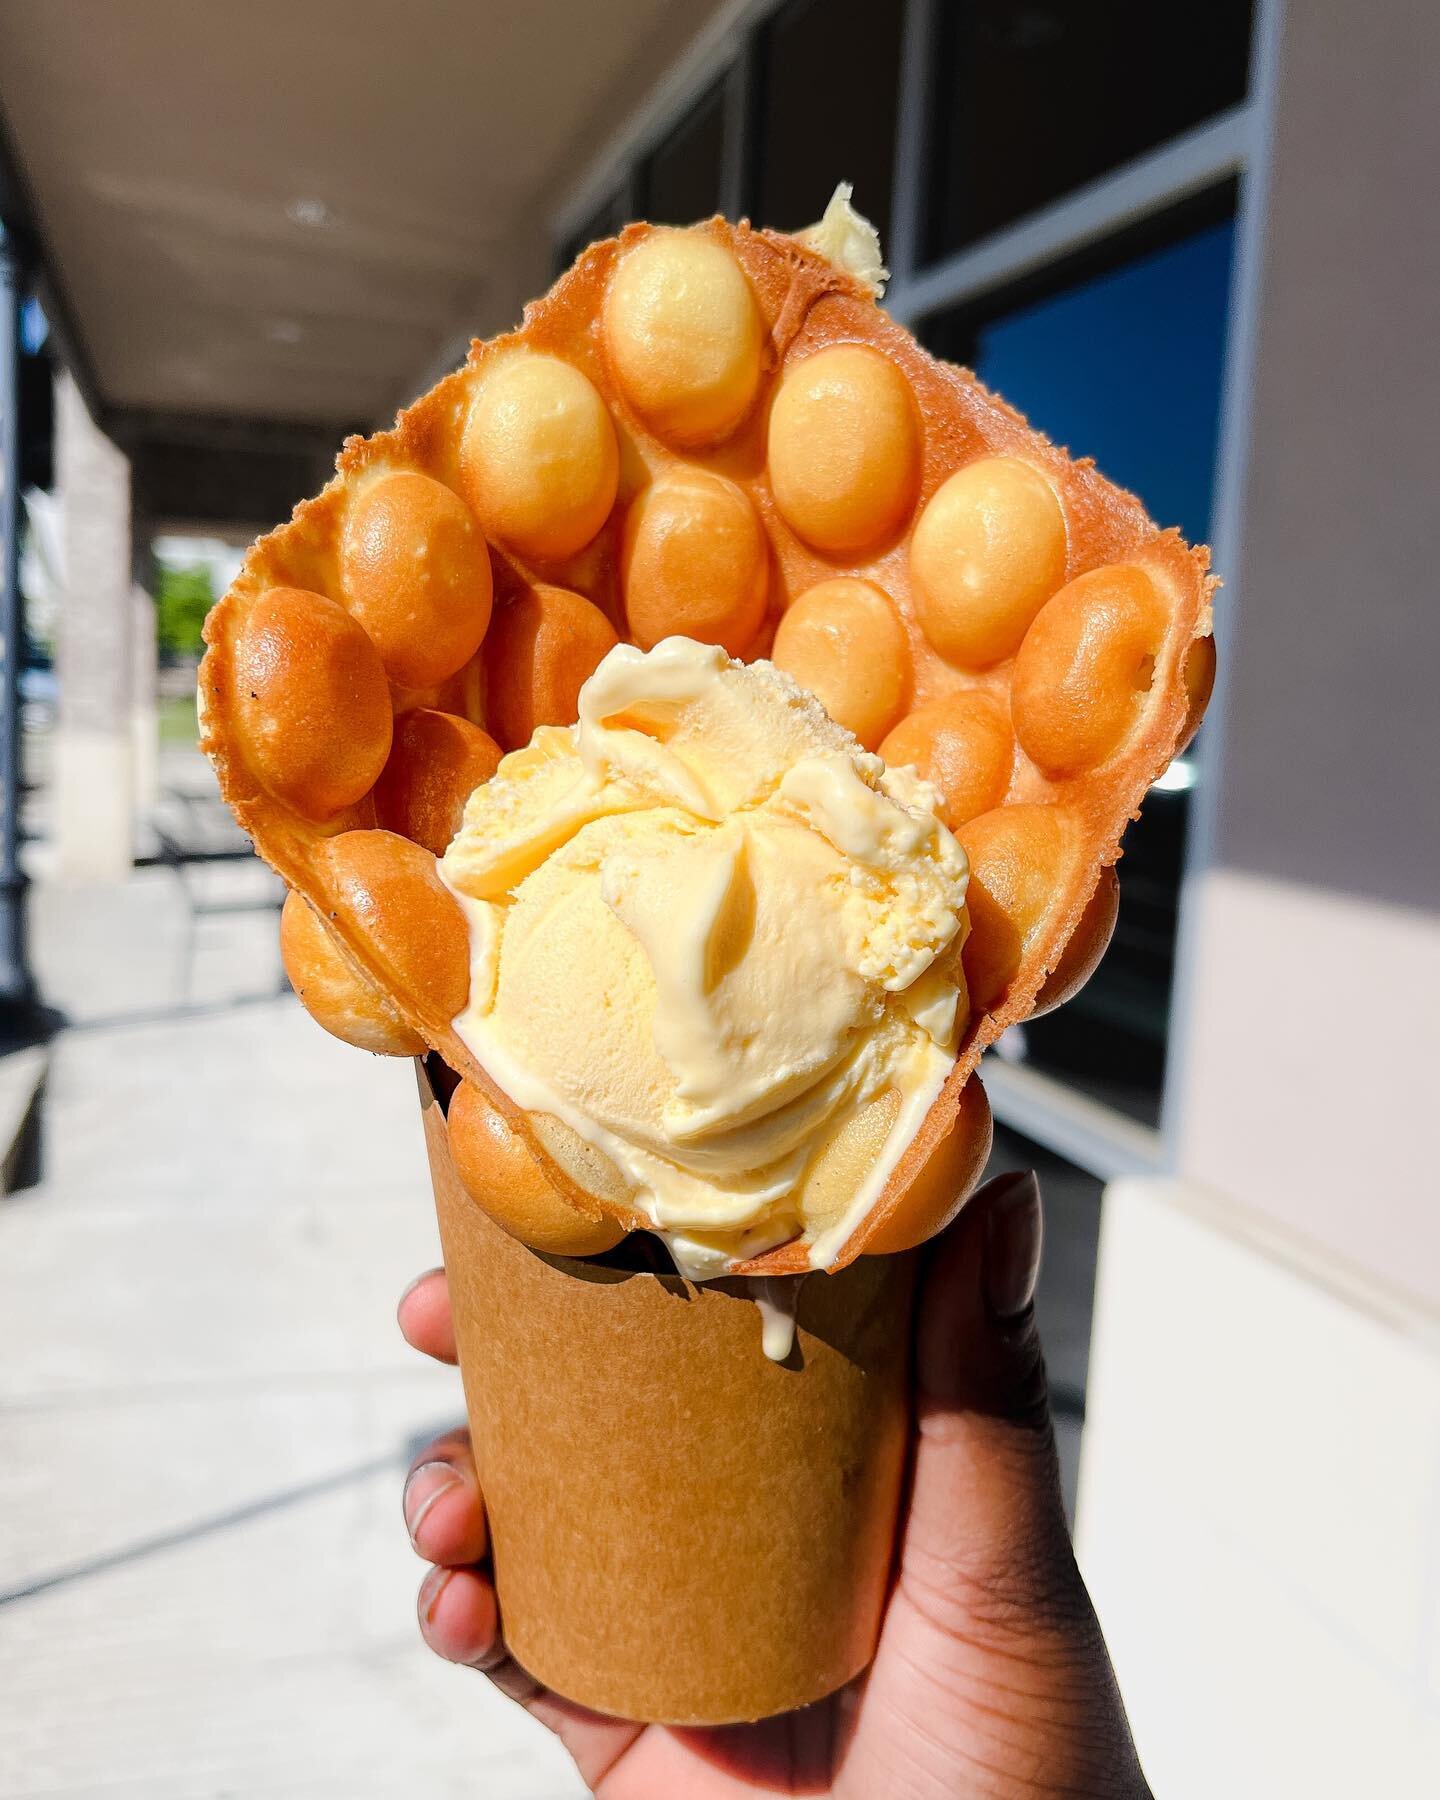 Looking to treat your kids to something fun and tasty? Our Hong Kong Bubble Waffle is what you need 😍 Crispy golden shell with a light, fluffy inside. Each &ldquo;bubble&rdquo; can be easily broken off for snacking or enjoyed with vanilla ice cream!